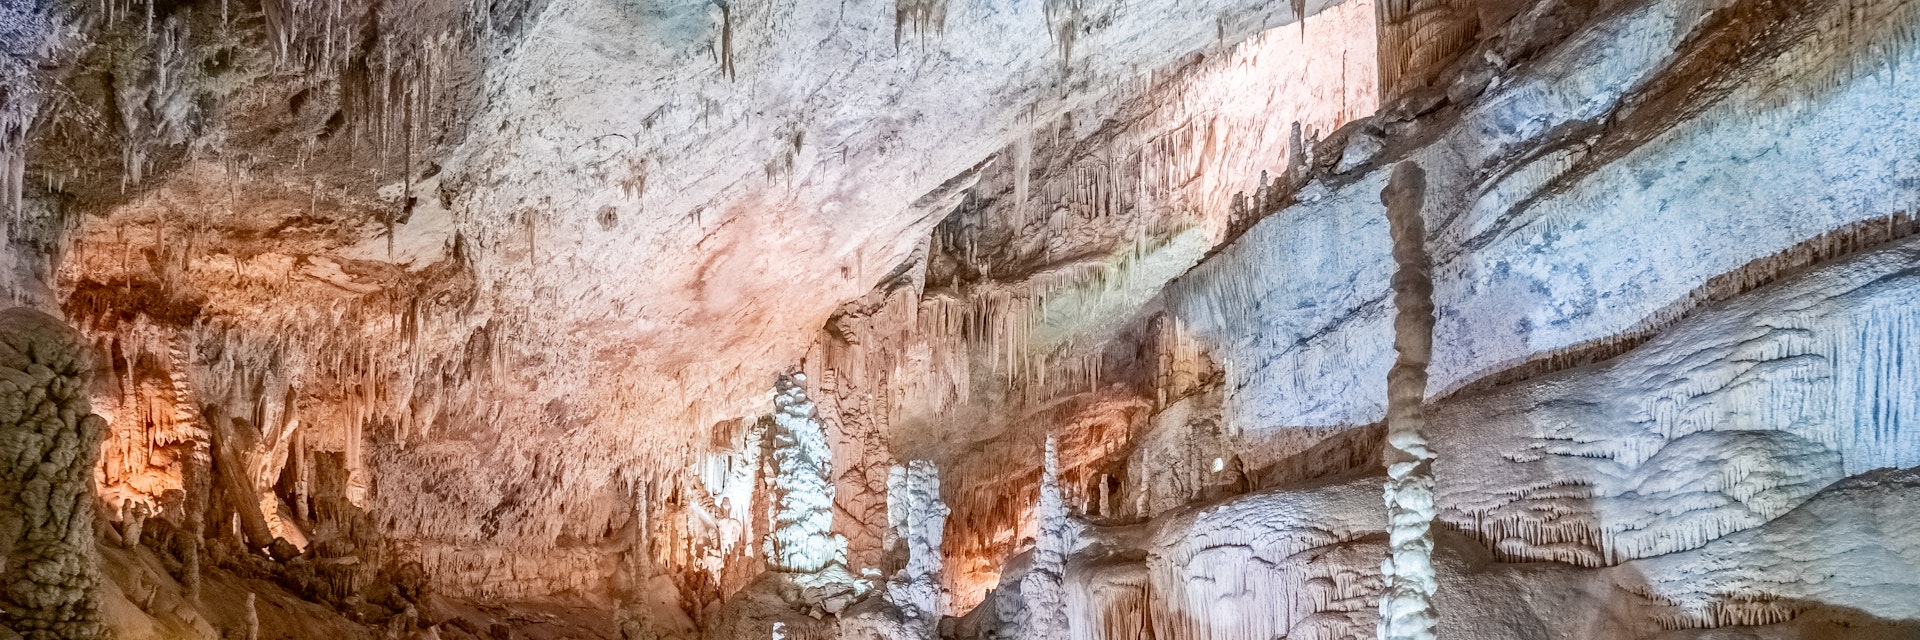 The Jeita Grotto in Lebanon is a system of two separate, but interconnected, karstic limestone caves.